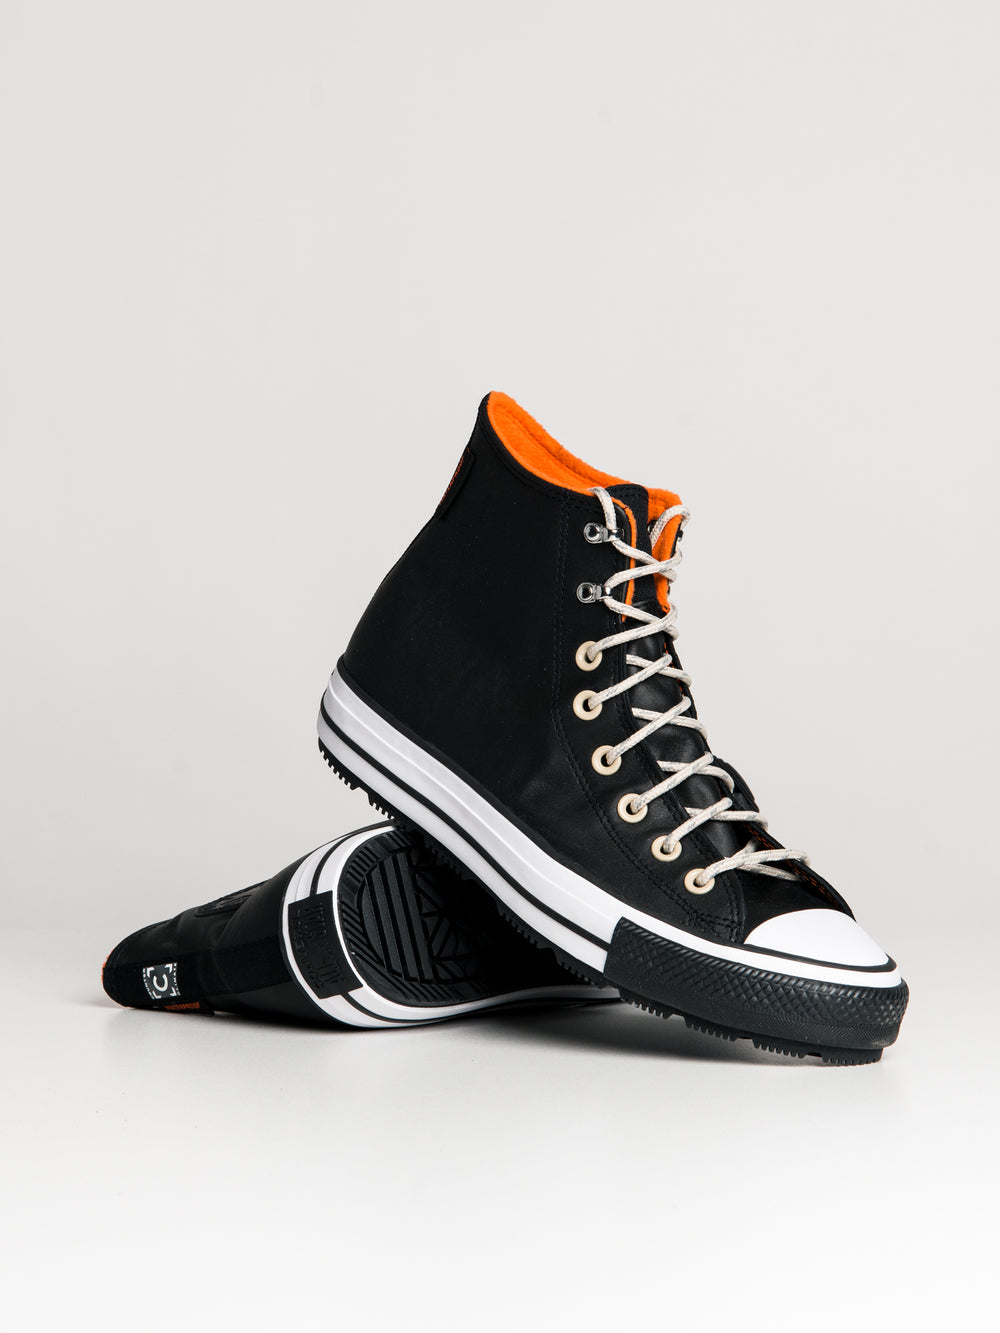 CONVERSE CHUCK ALL STAR WINTER BOOTS CLEARANCE